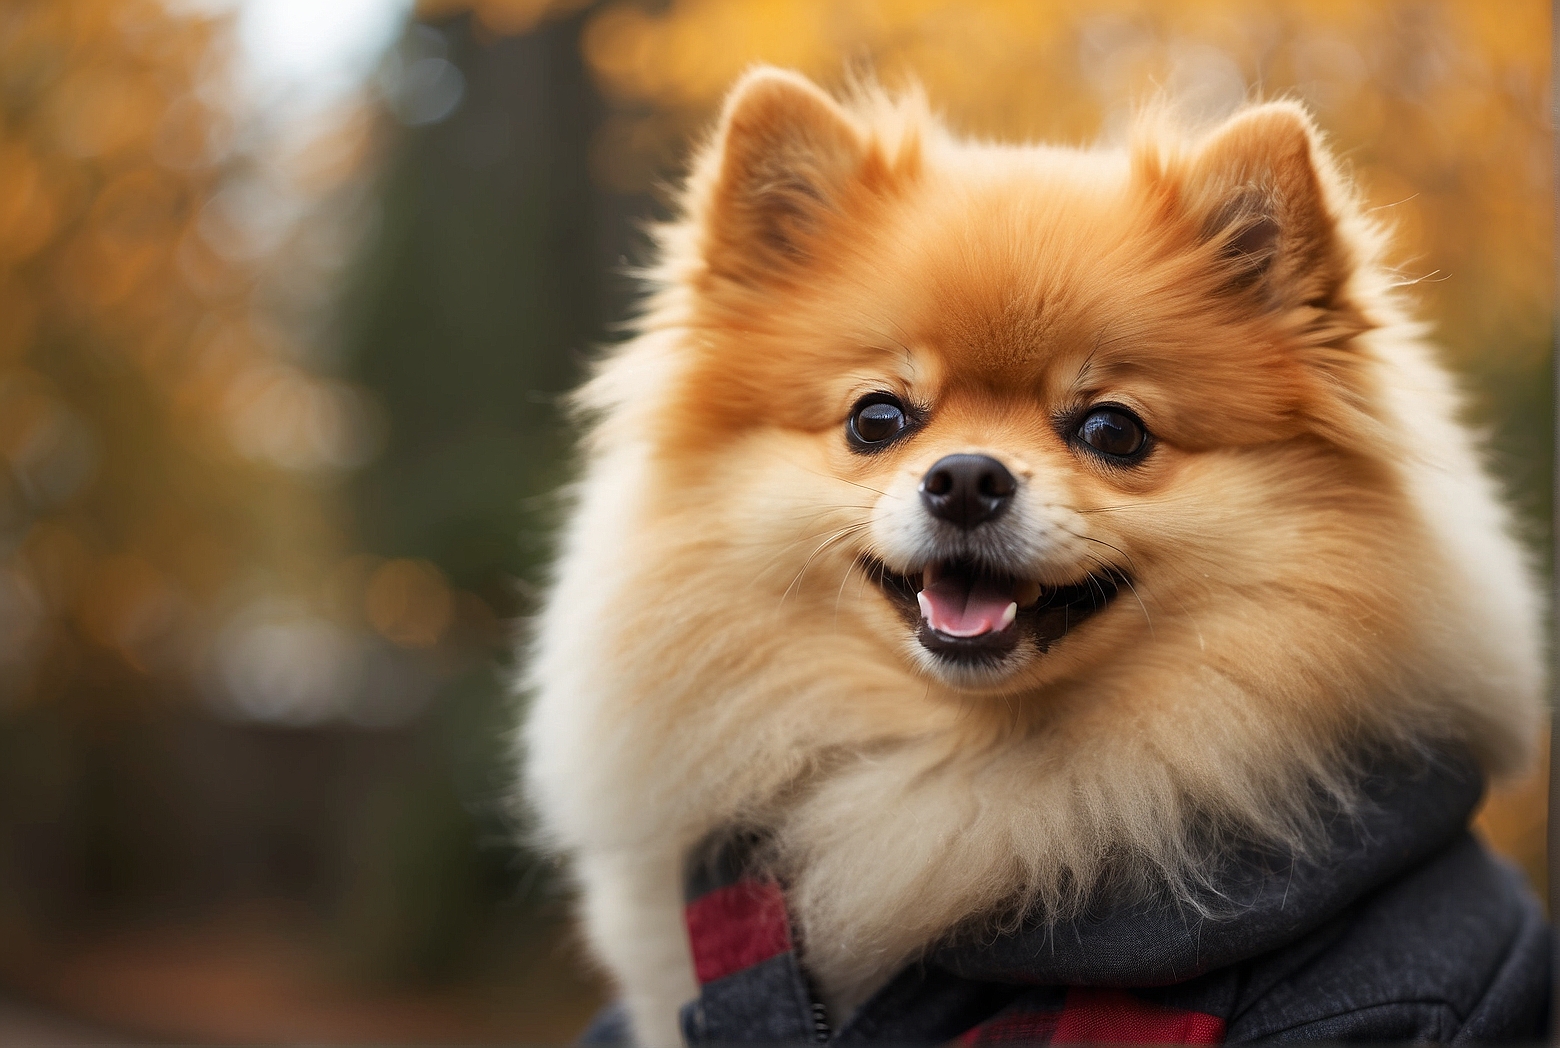 Why Does My Pomeranian Constantly Lick Me?